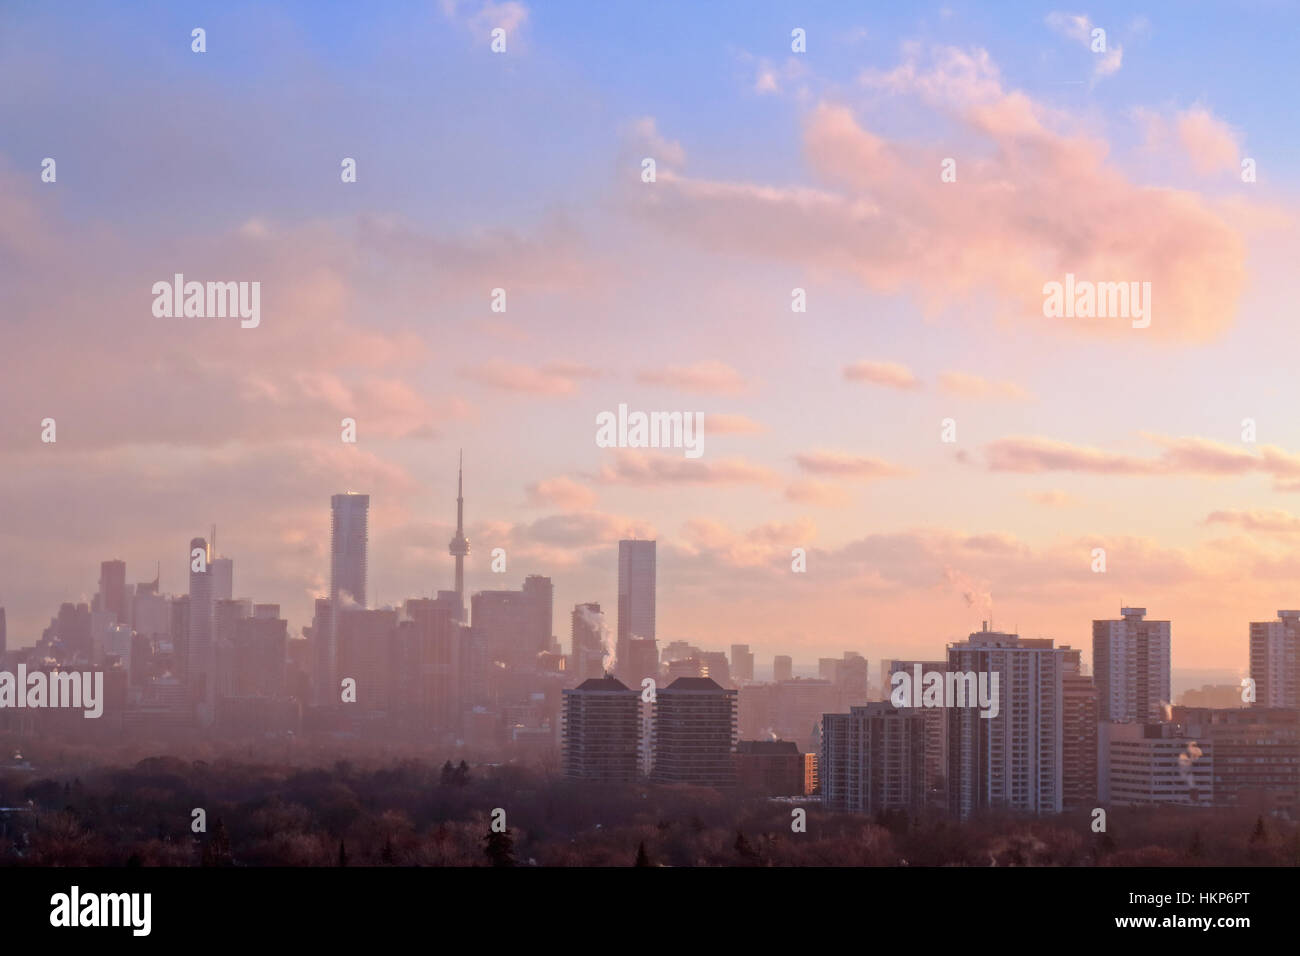 Toronto downtown and midtown skline with fog and pink winter sunset clouds Stock Photo